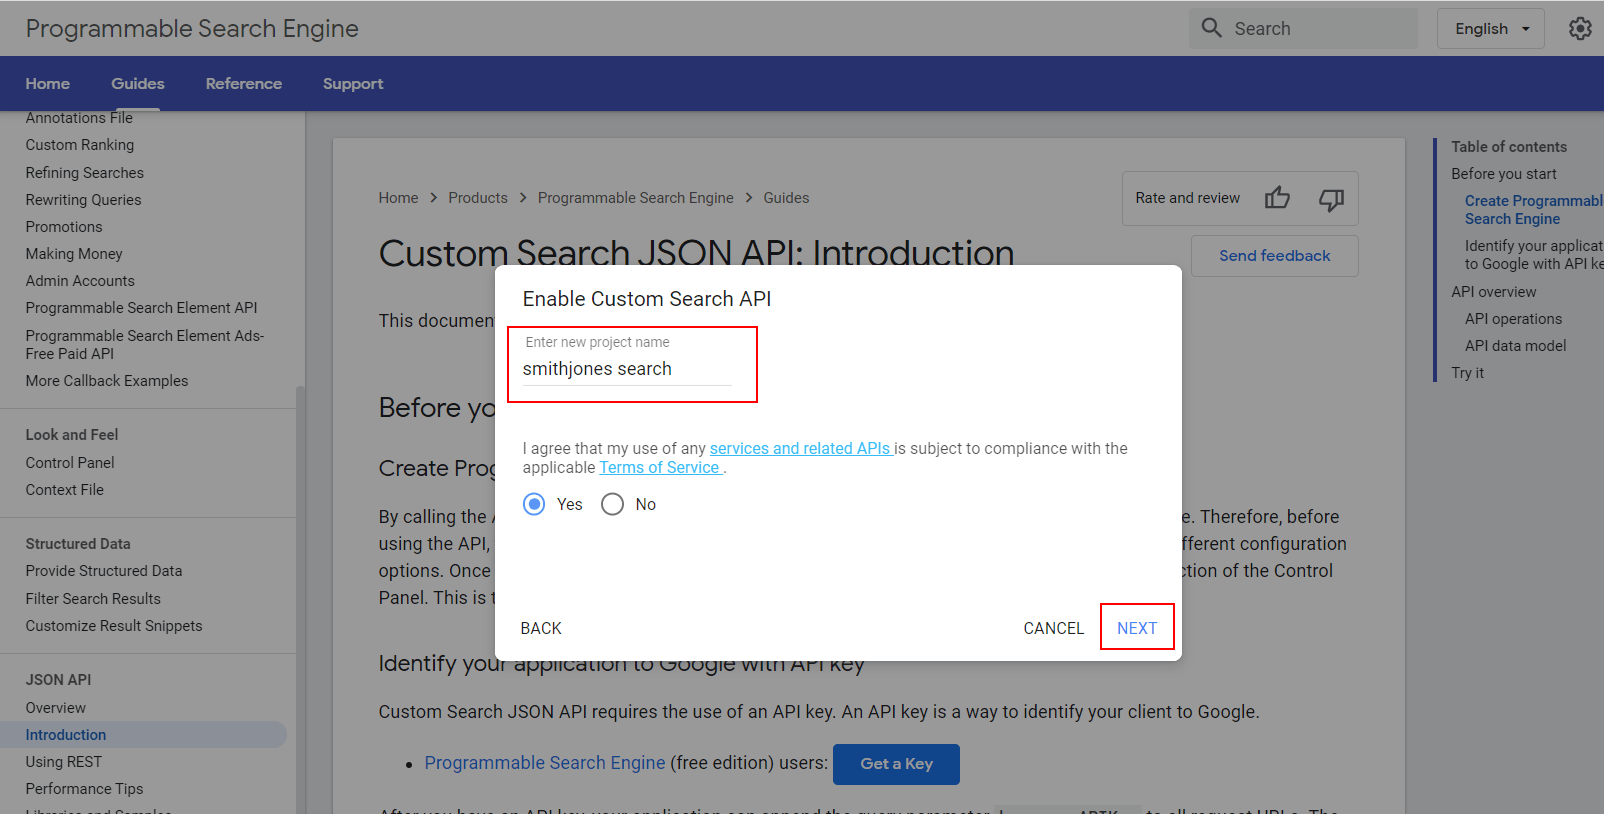 This image shows the Enable Custom Search API setting window in the JASON API set up of the Google Programmable Search Engine. It highlights the Enter new project name field and the NEXT button.